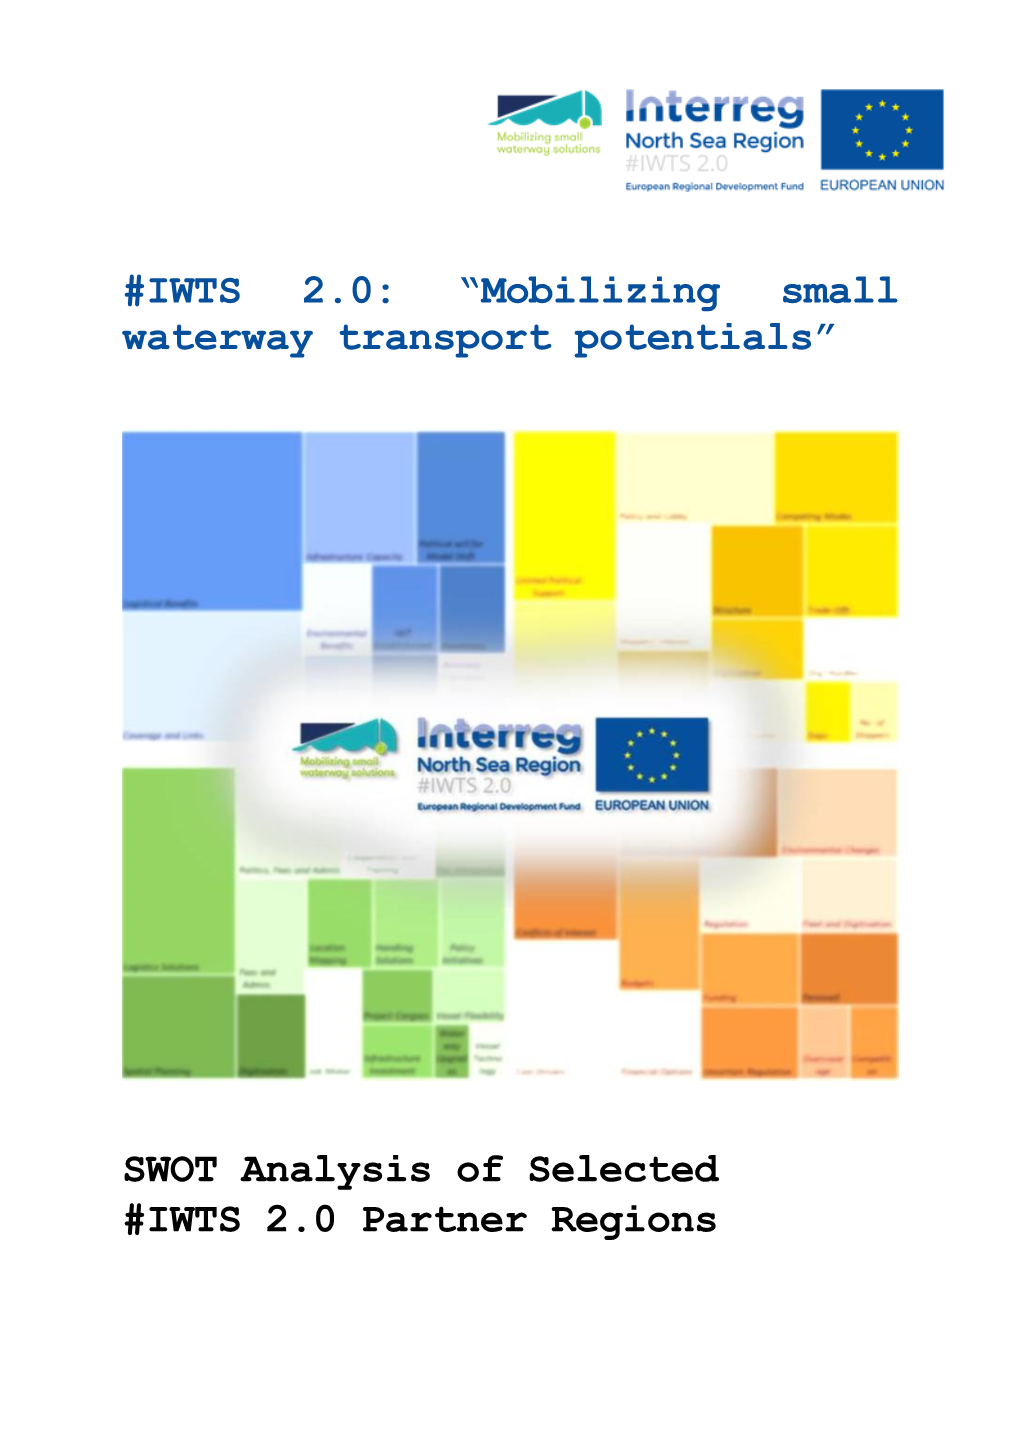 SWOT Analysis of Selected #IWTS 2.0 Partner Regions